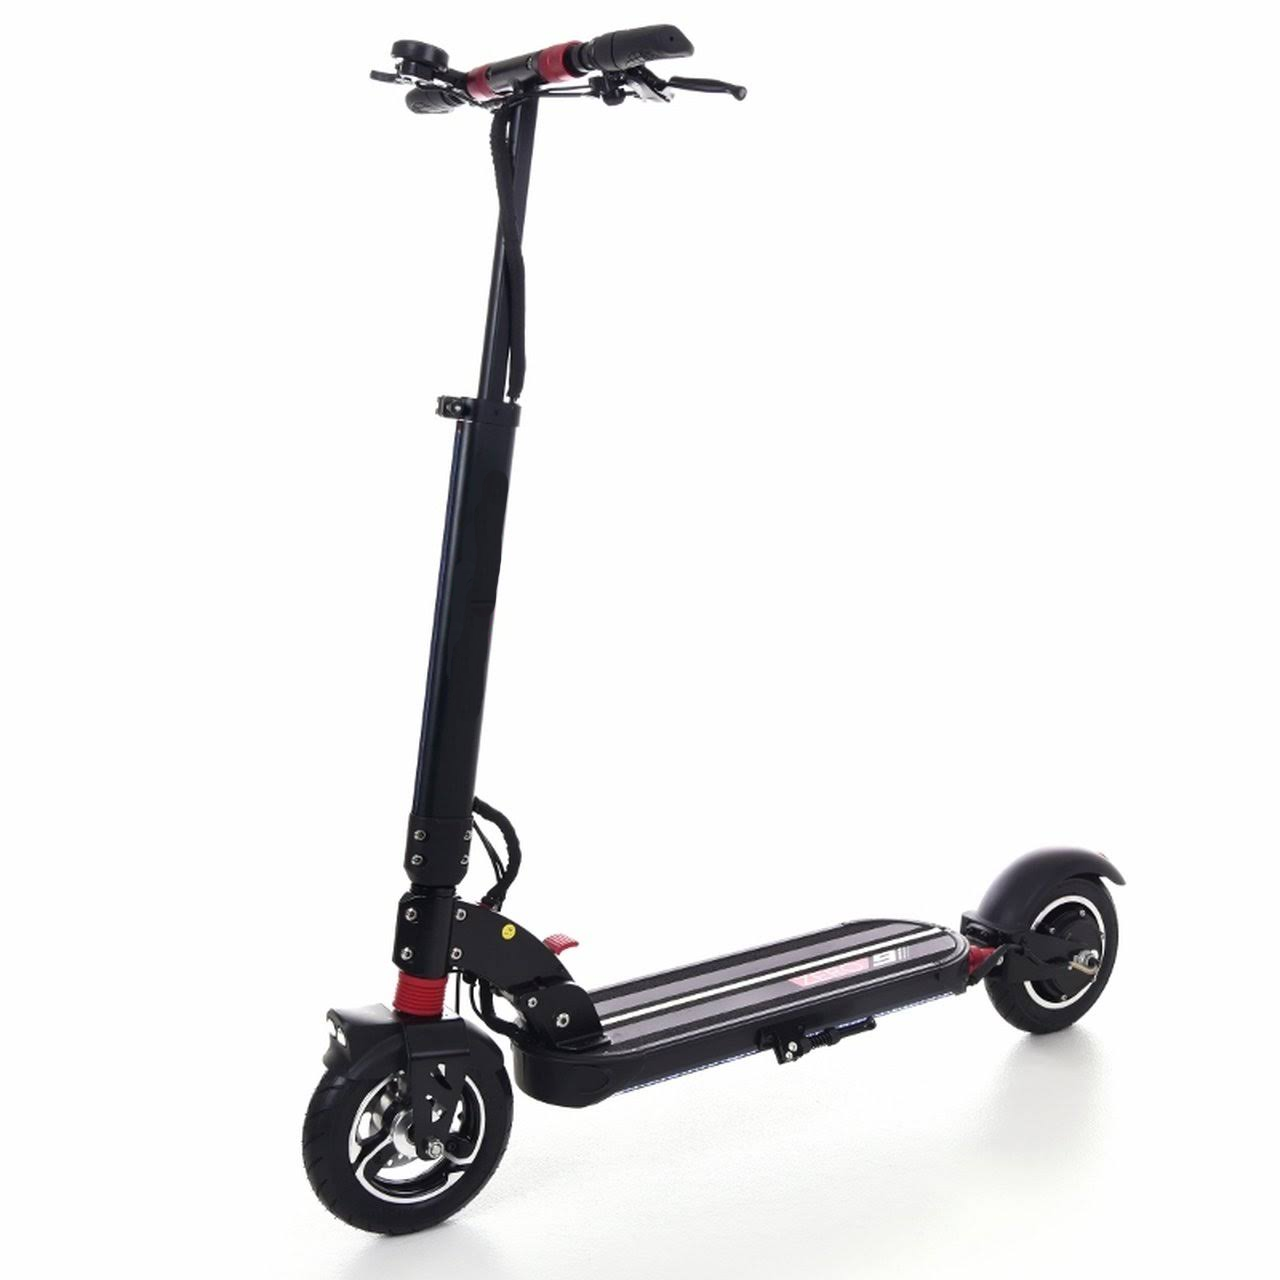 9S OEM E-Power Motor 2000w Portable And Foldable Longboard Boosted Electric Kick Scooter